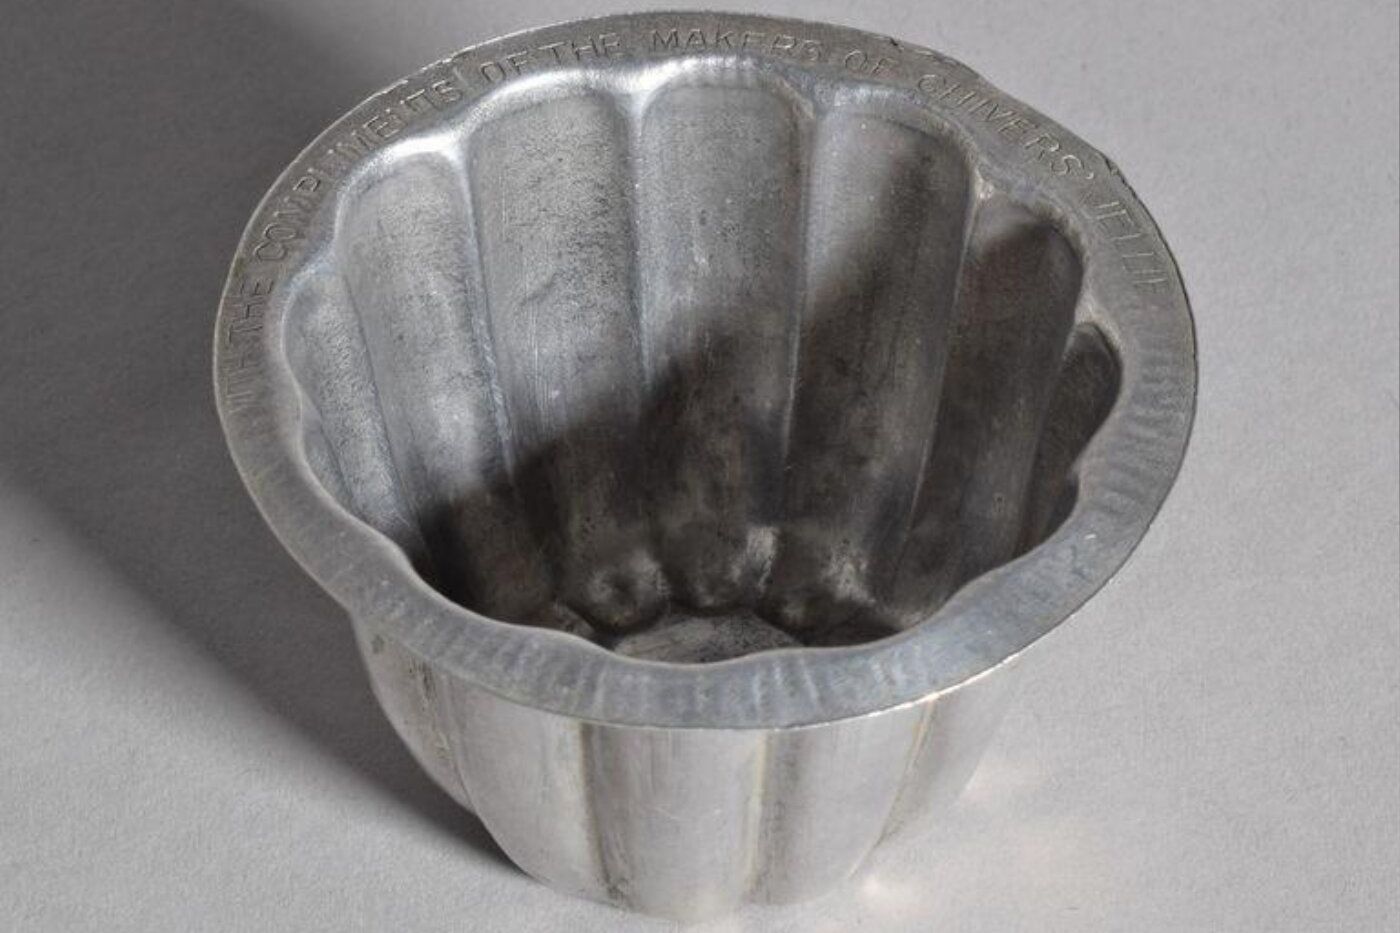 Miniature jelly mould, aluminium, flared shape with a flat rim and concave (on the inside) vertical grooves. Impressed letters around the rim `With the compliments of the makers of Chivers' jellies),